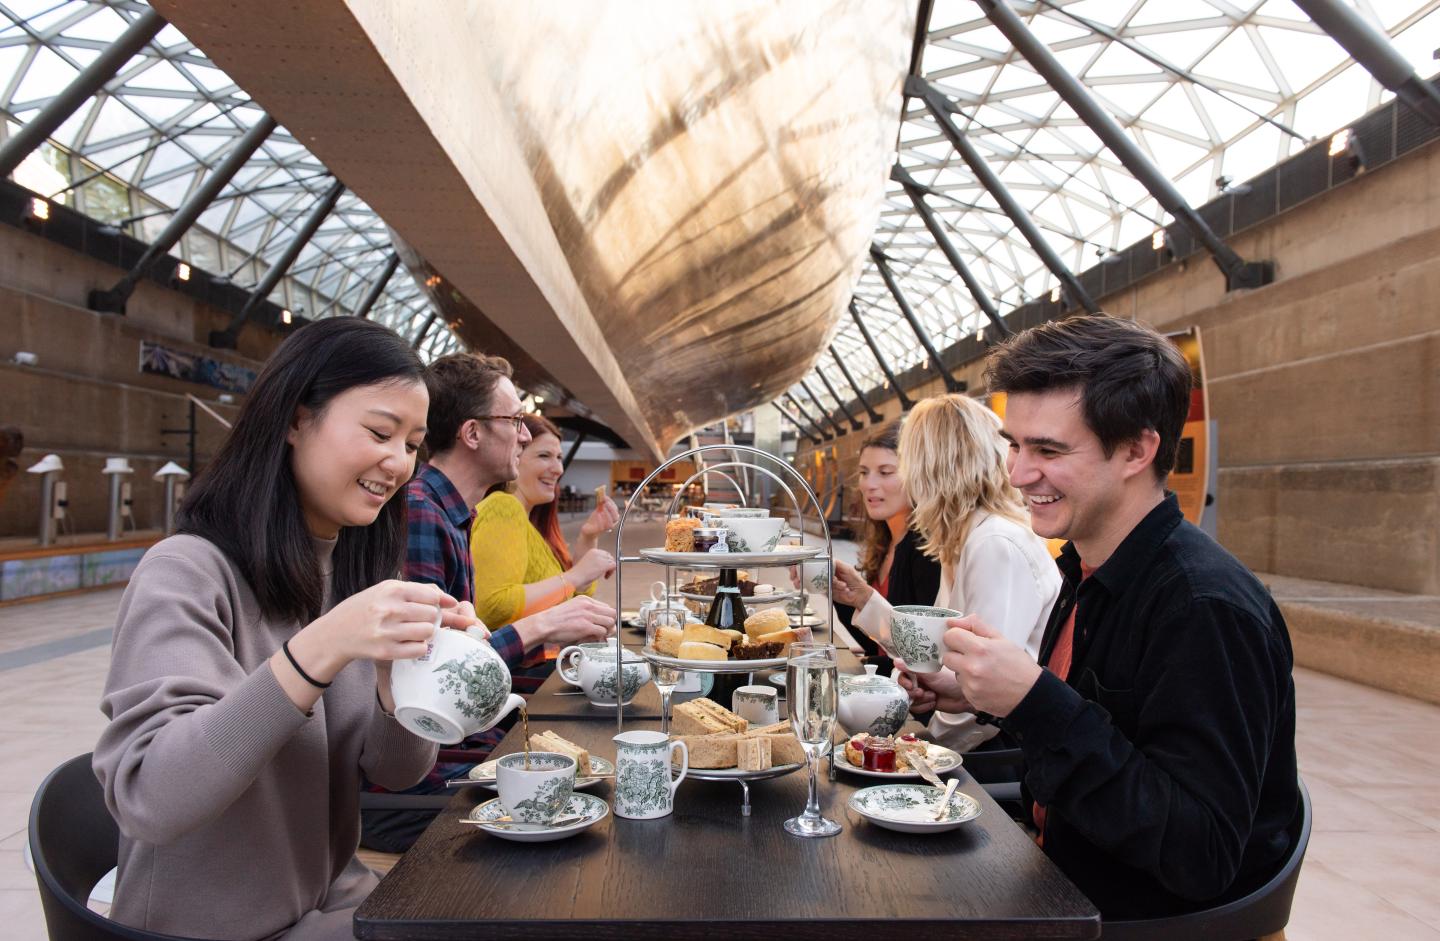 A group of diners enjoy afternoon tea beneath the historic ship Cutty Sark. The ship's hull can be seen 'floating' above them, supported by steel girders and a glass structure. On the table are cakes, sandwiches and fine china